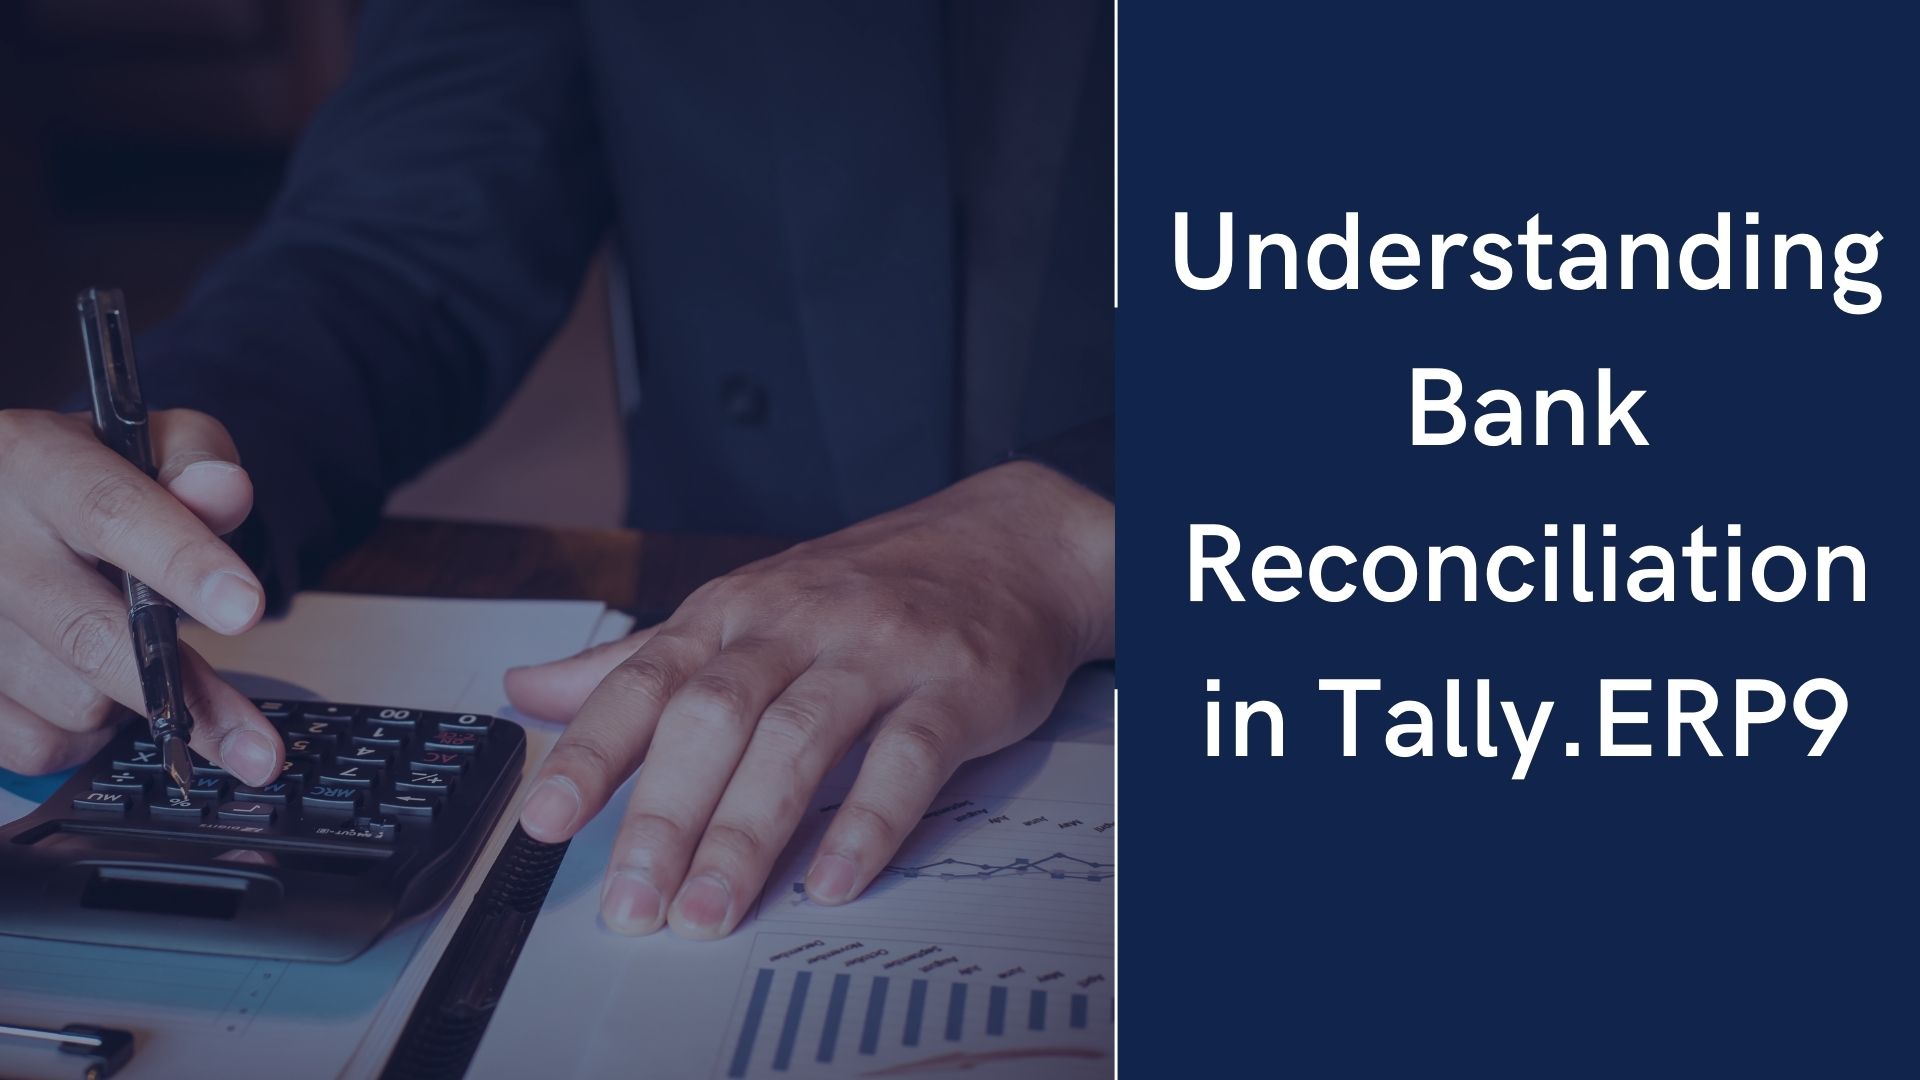 Understanding Bank Reconciliation in Tally.ERP9